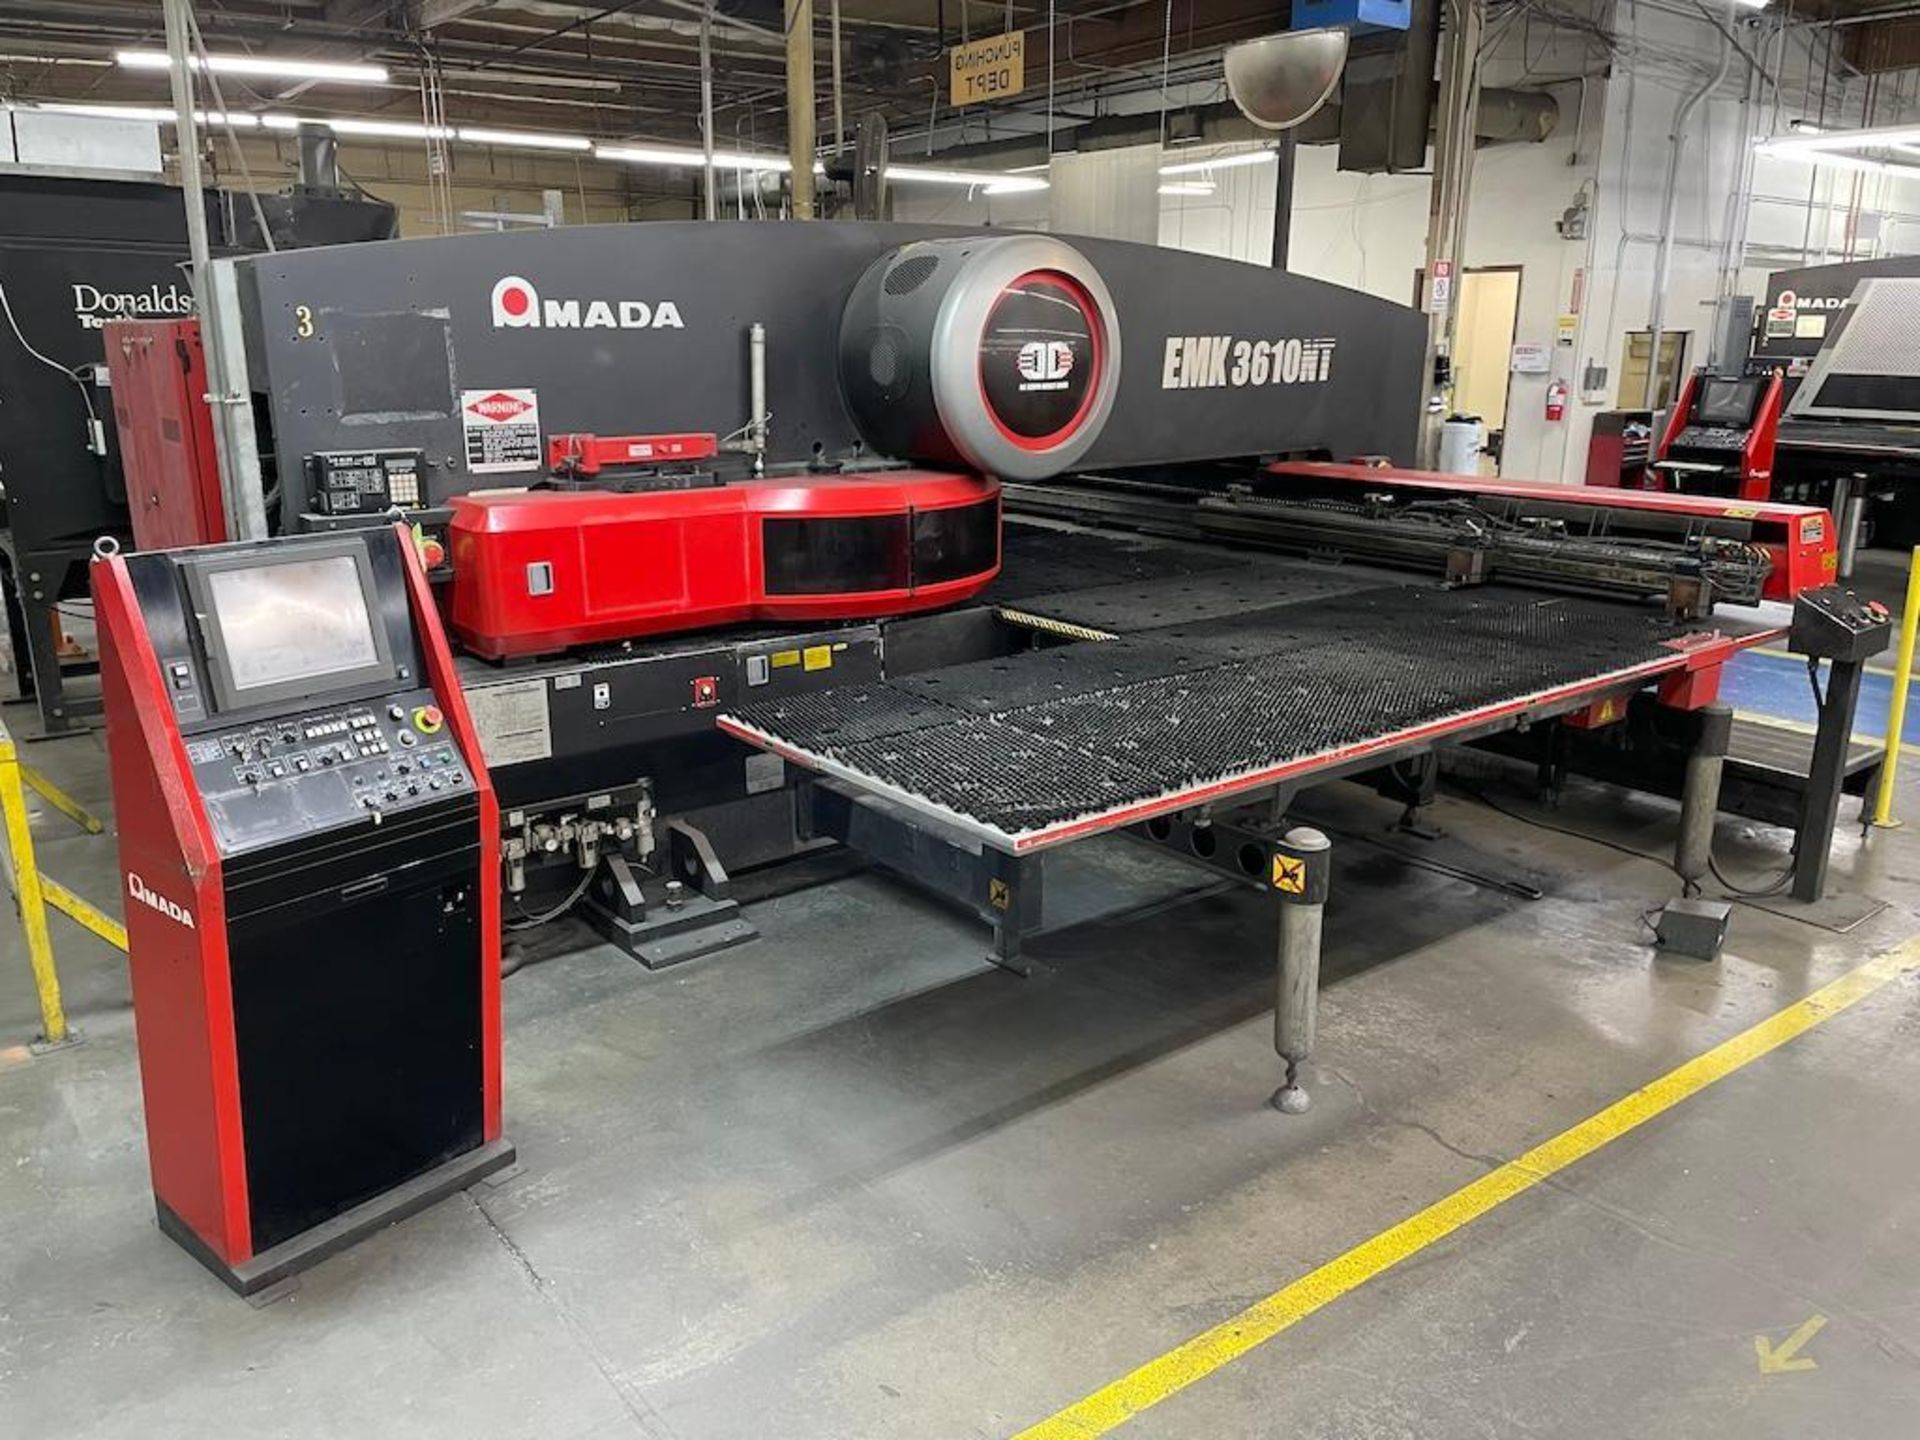 AMADA 30 TON ELECTRIC TURRET PUNCH, MODEL EMK 3610NT, 58 STATIONS W 4 AUTO INDEXING UNITS, HIGH